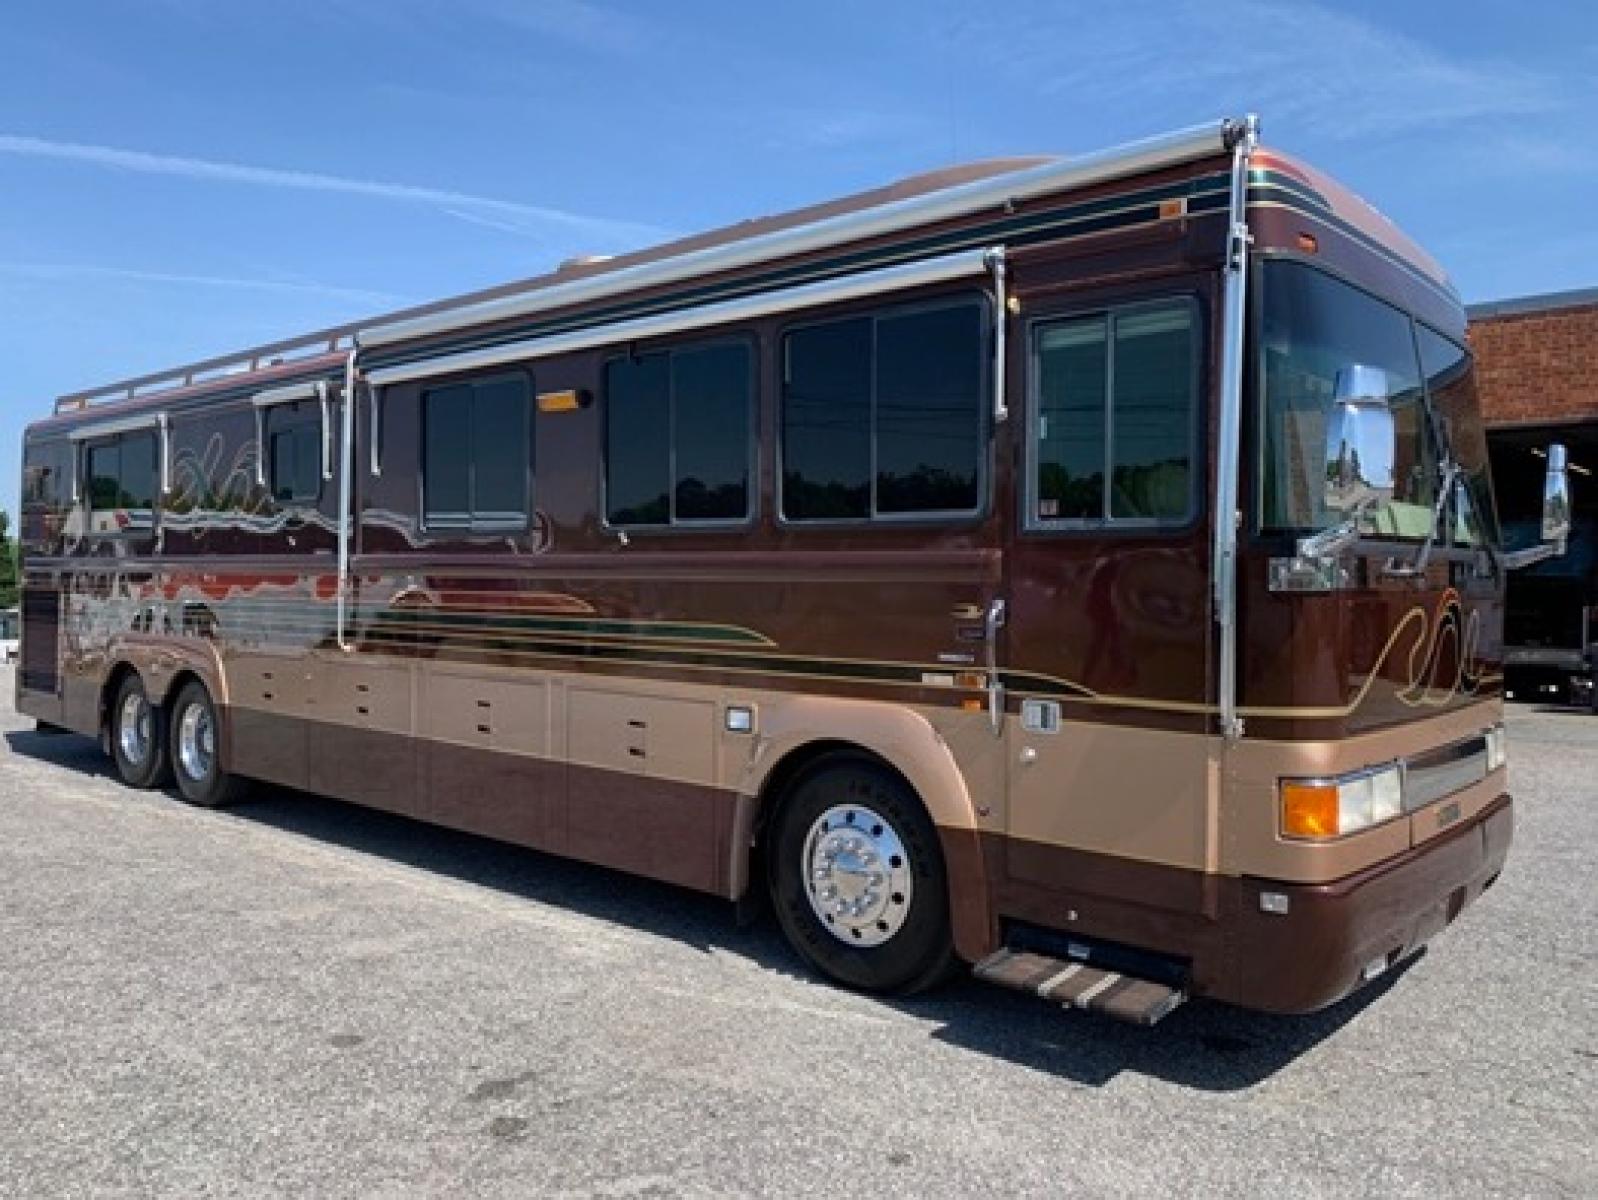 1996 Bluebird 42IX with an Detroit Diesel engine, Allison transmission, 0.000000, 0.000000 - 1996 BLUEBIRD WONDERLODGE 42IX - Series 60 Detroit Diesel Engine - Allison Automatic Transmission - Aluminum Wheels – New Tires 09-2022 - 20 KW Power Tech Generator - 3 Roof A/C's – Awning - 42' Long - Front Lounge – Kitchen - Restroom with Shower - Rear Bedroom - New Airbags 01-2023- - Photo #0